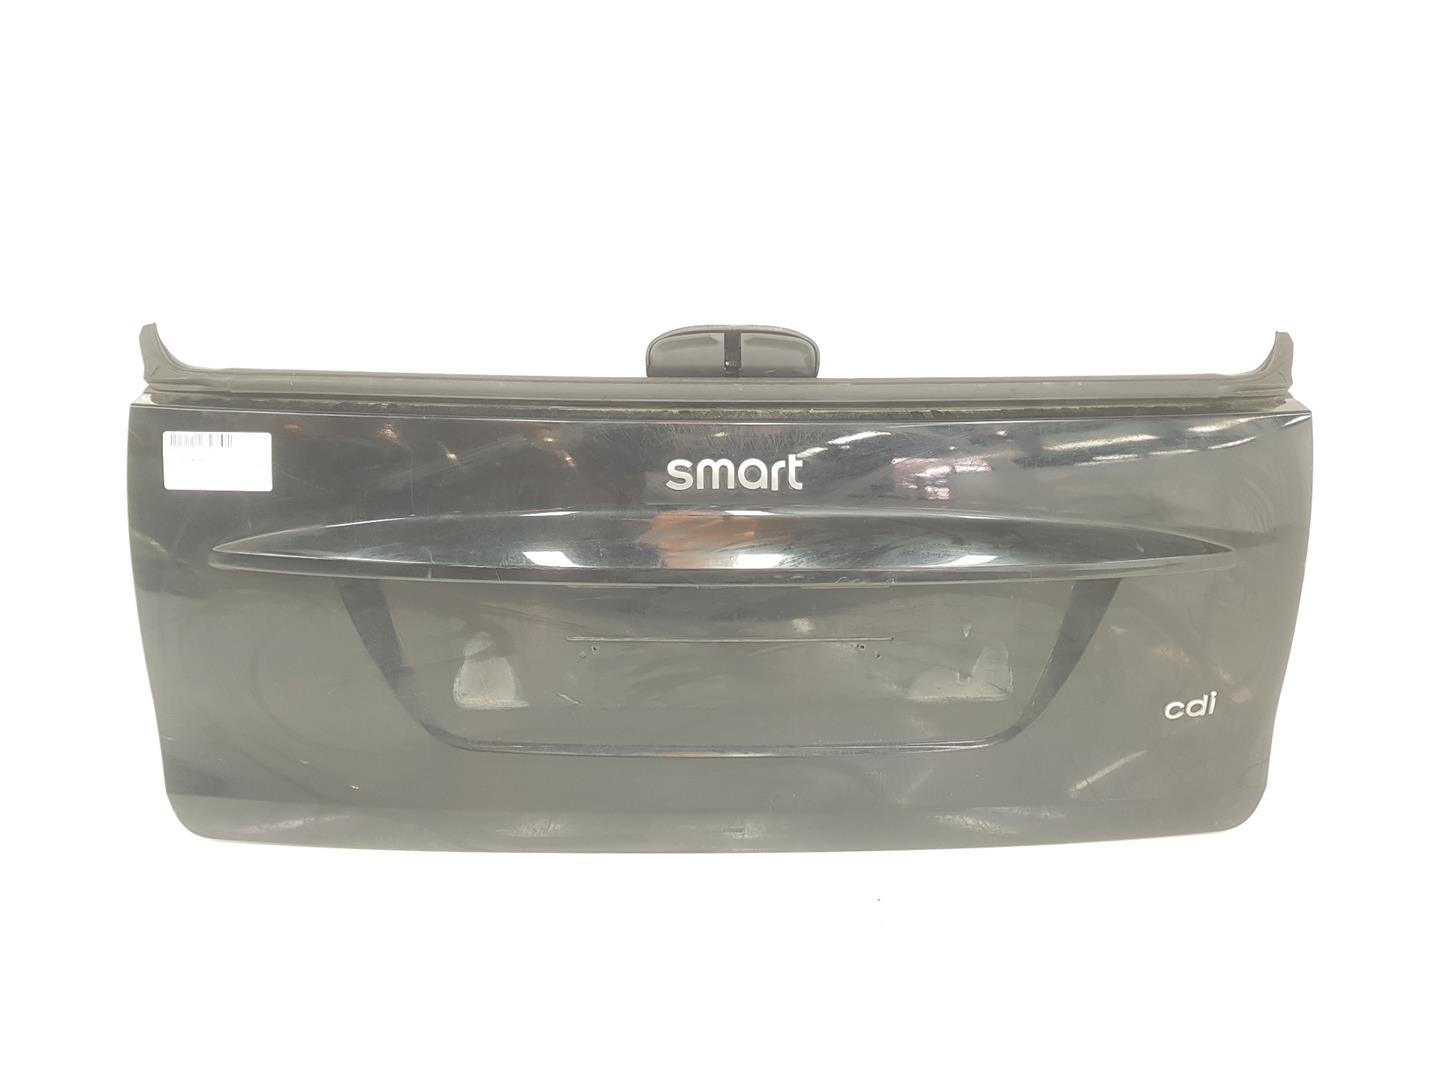 SMART Fortwo 2 generation (2007-2015) Galinis dangtis A4517570006, A4517570006, COLORNEGROECA 19837095